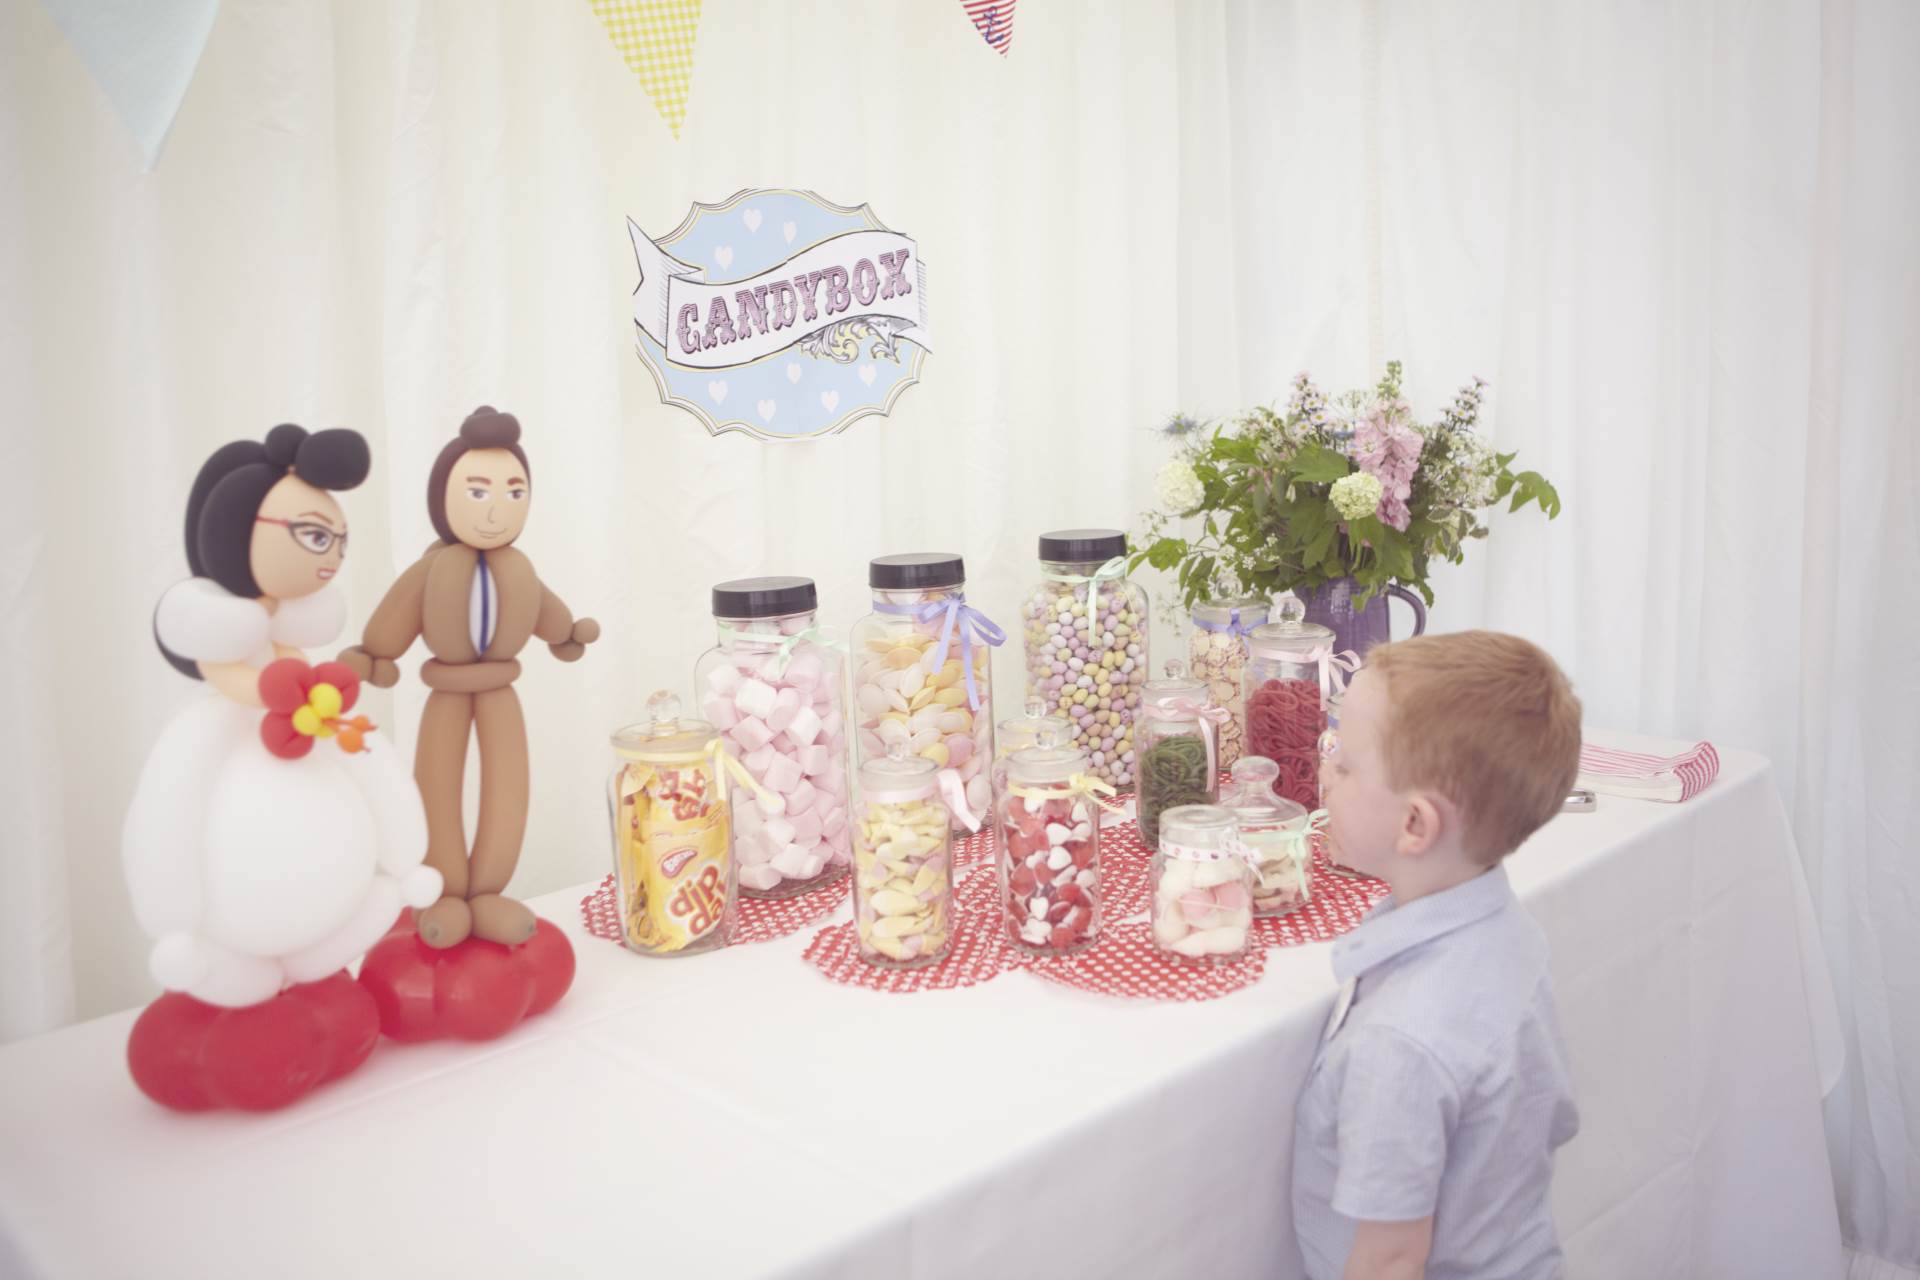 Dan and Maddi's Vintage Americana Country Wedding by Natalie J Weddings and featured on The National Vintage Wedding Fair sweets